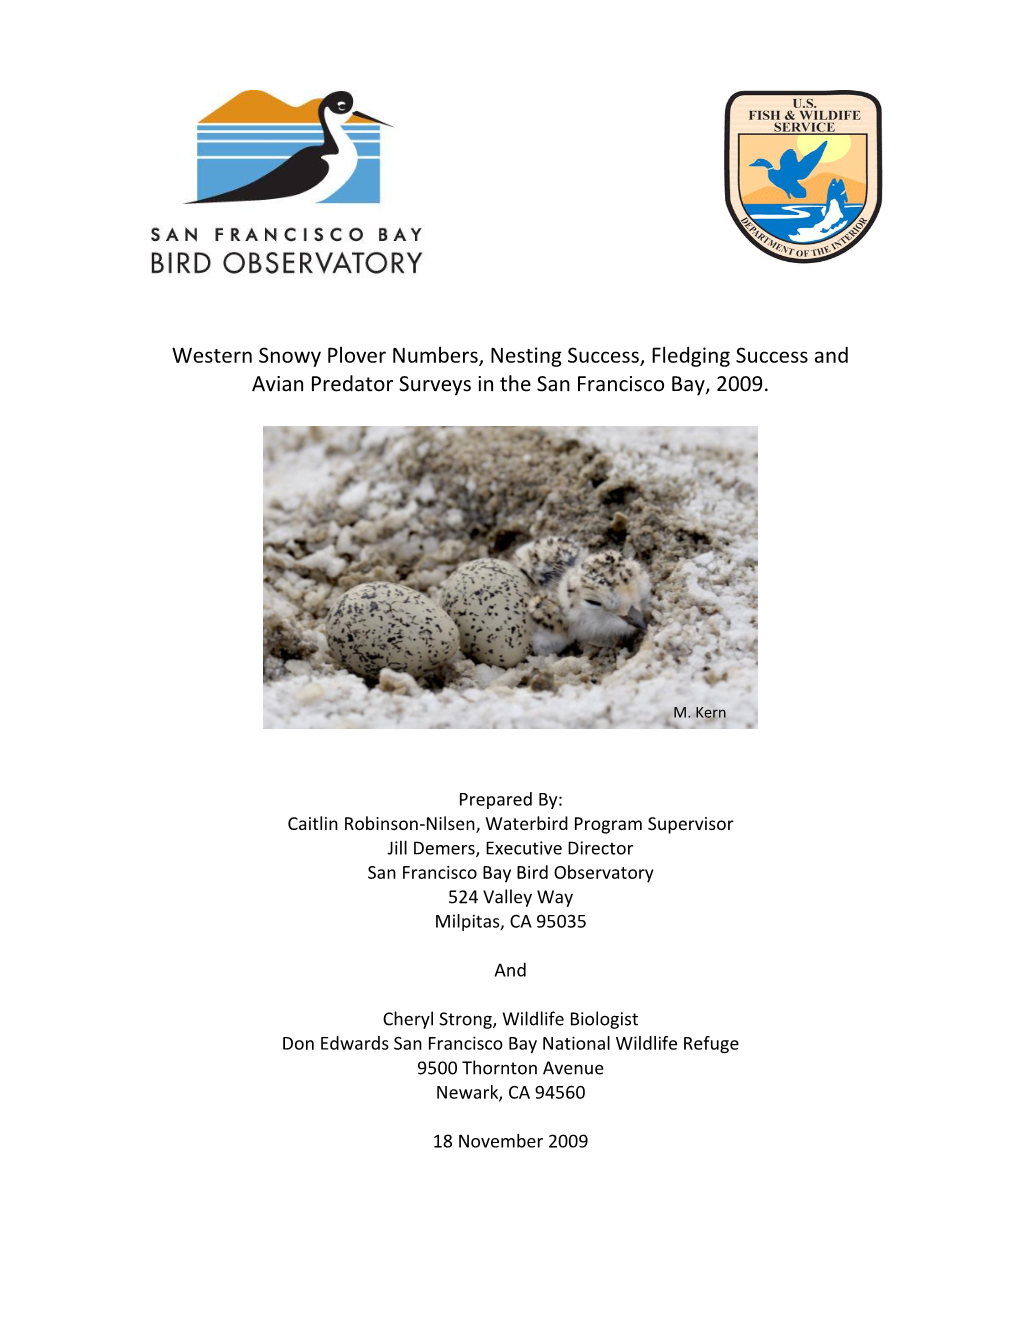 Western Snowy Plover Numbers, Nesting Success, Fledging Success and Avian Predator Surveys in the San Francisco Bay, 2009